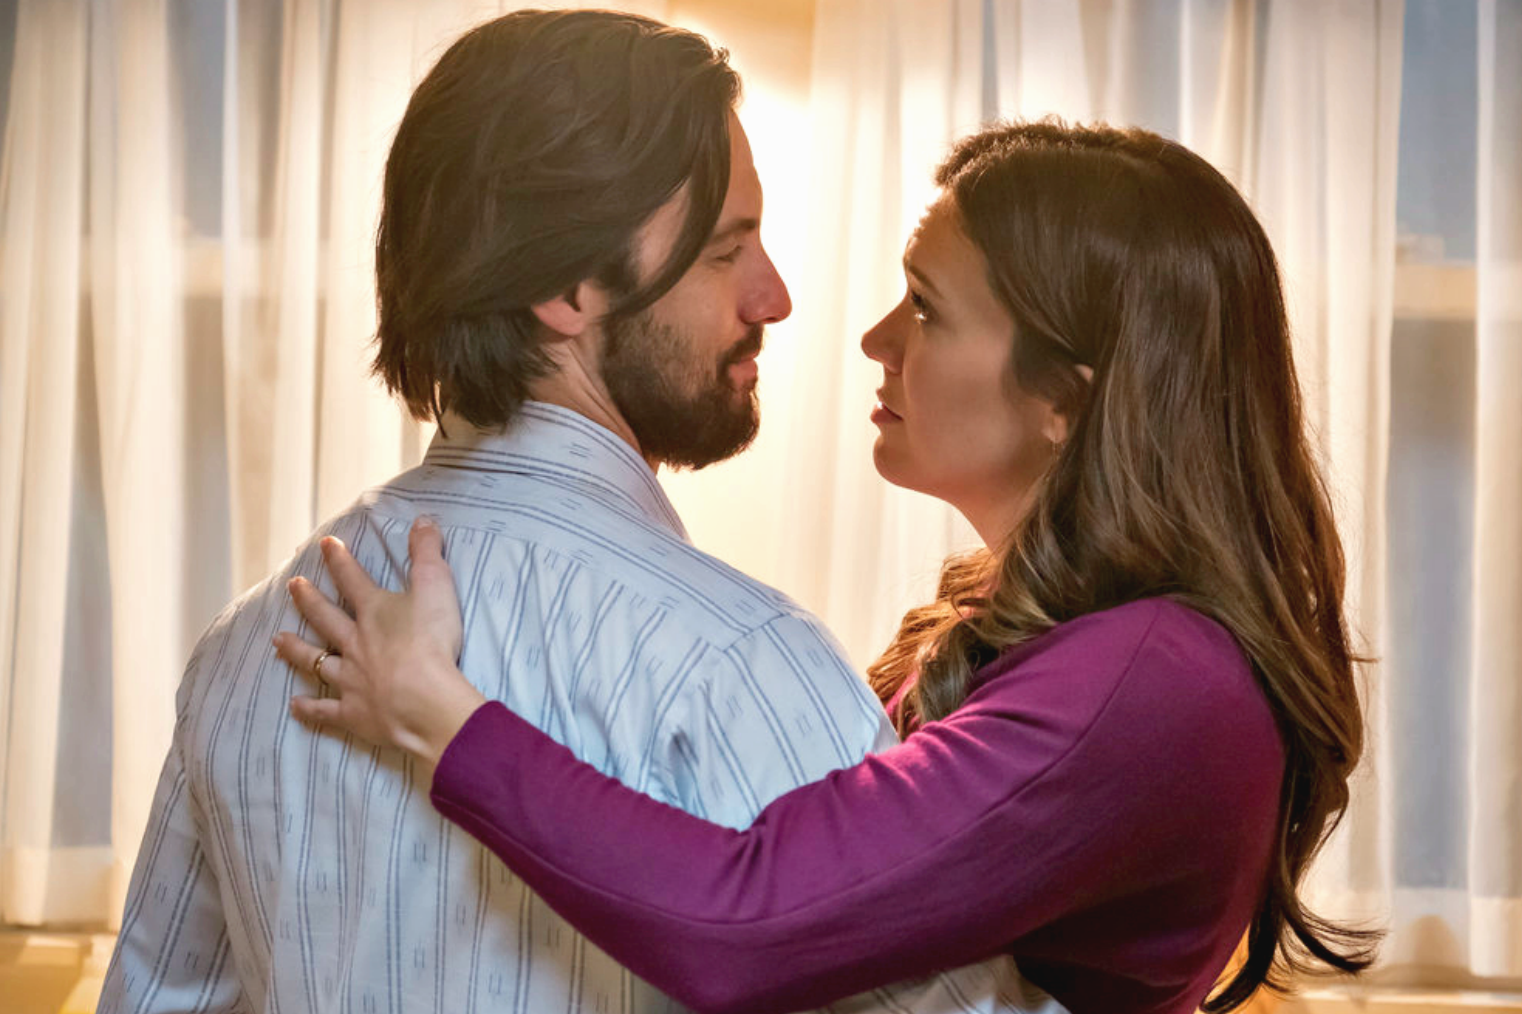 Mandy Moore and Milo Ventimiglia embrace as Rebecca and Jack Pearson on 'This Is Us